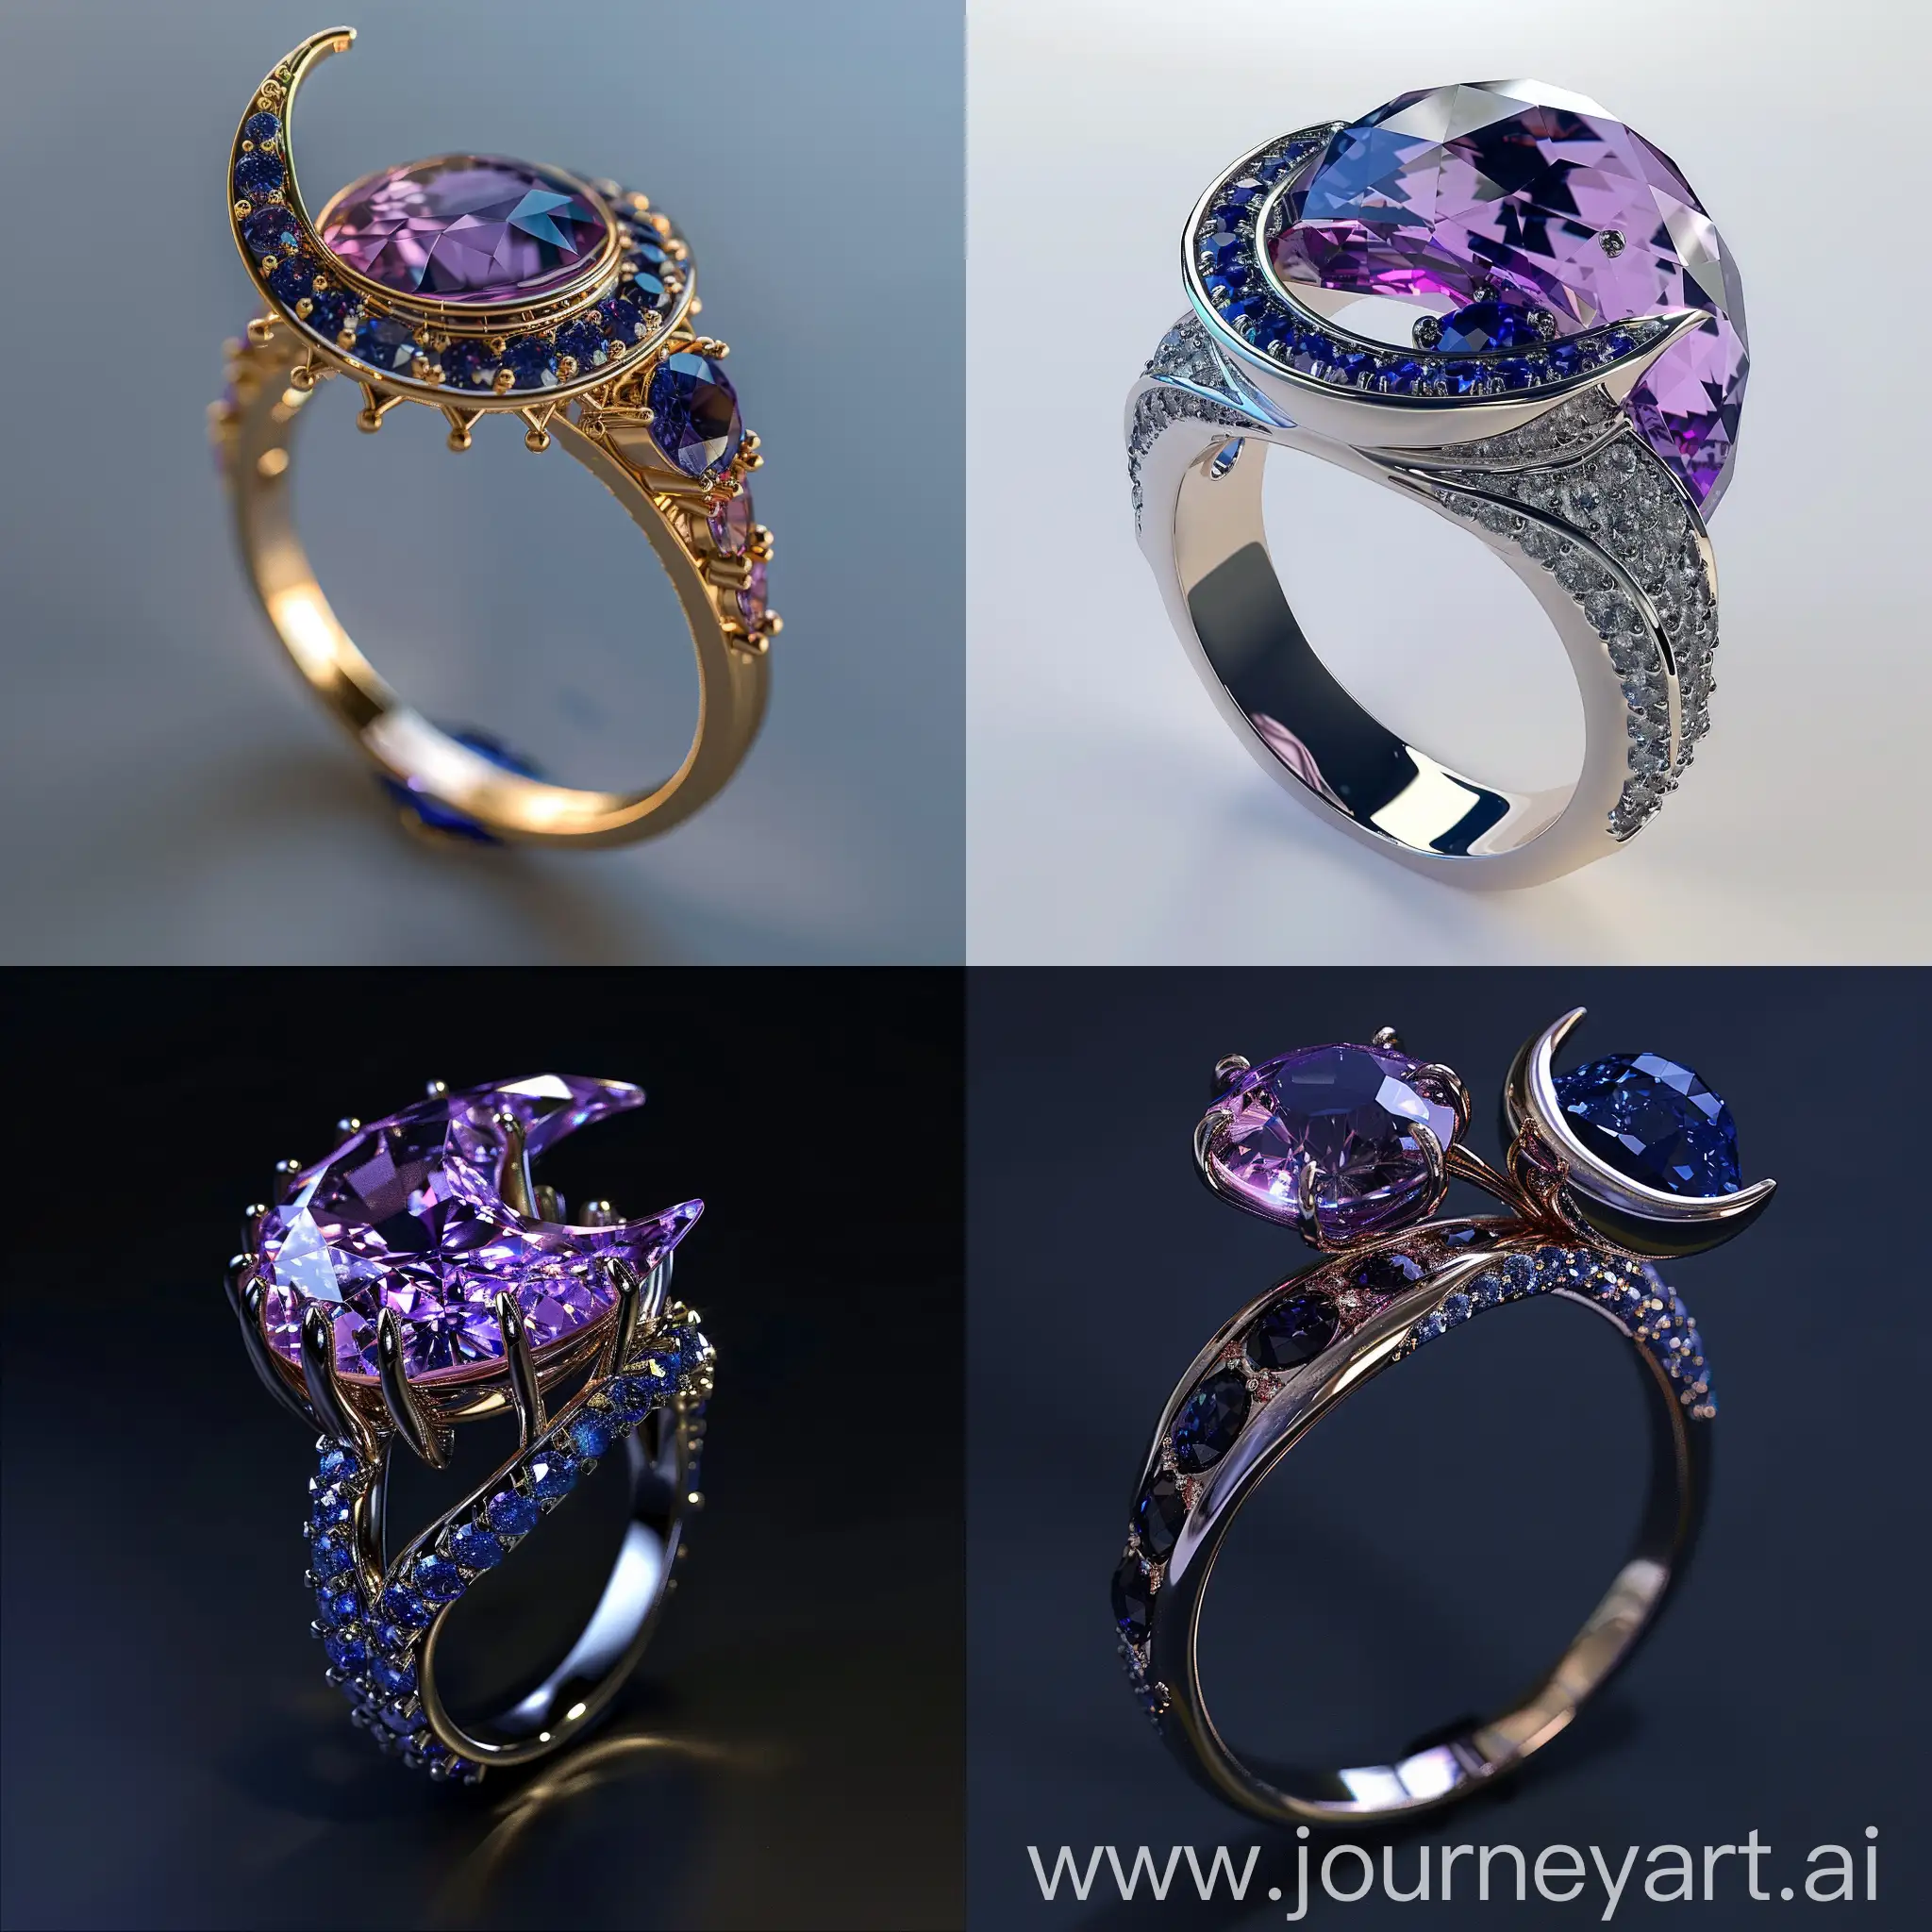 Violet-Amethyst-Ring-with-MoonShaped-Blue-Sapphire-Symbolizing-Emotions-and-Power